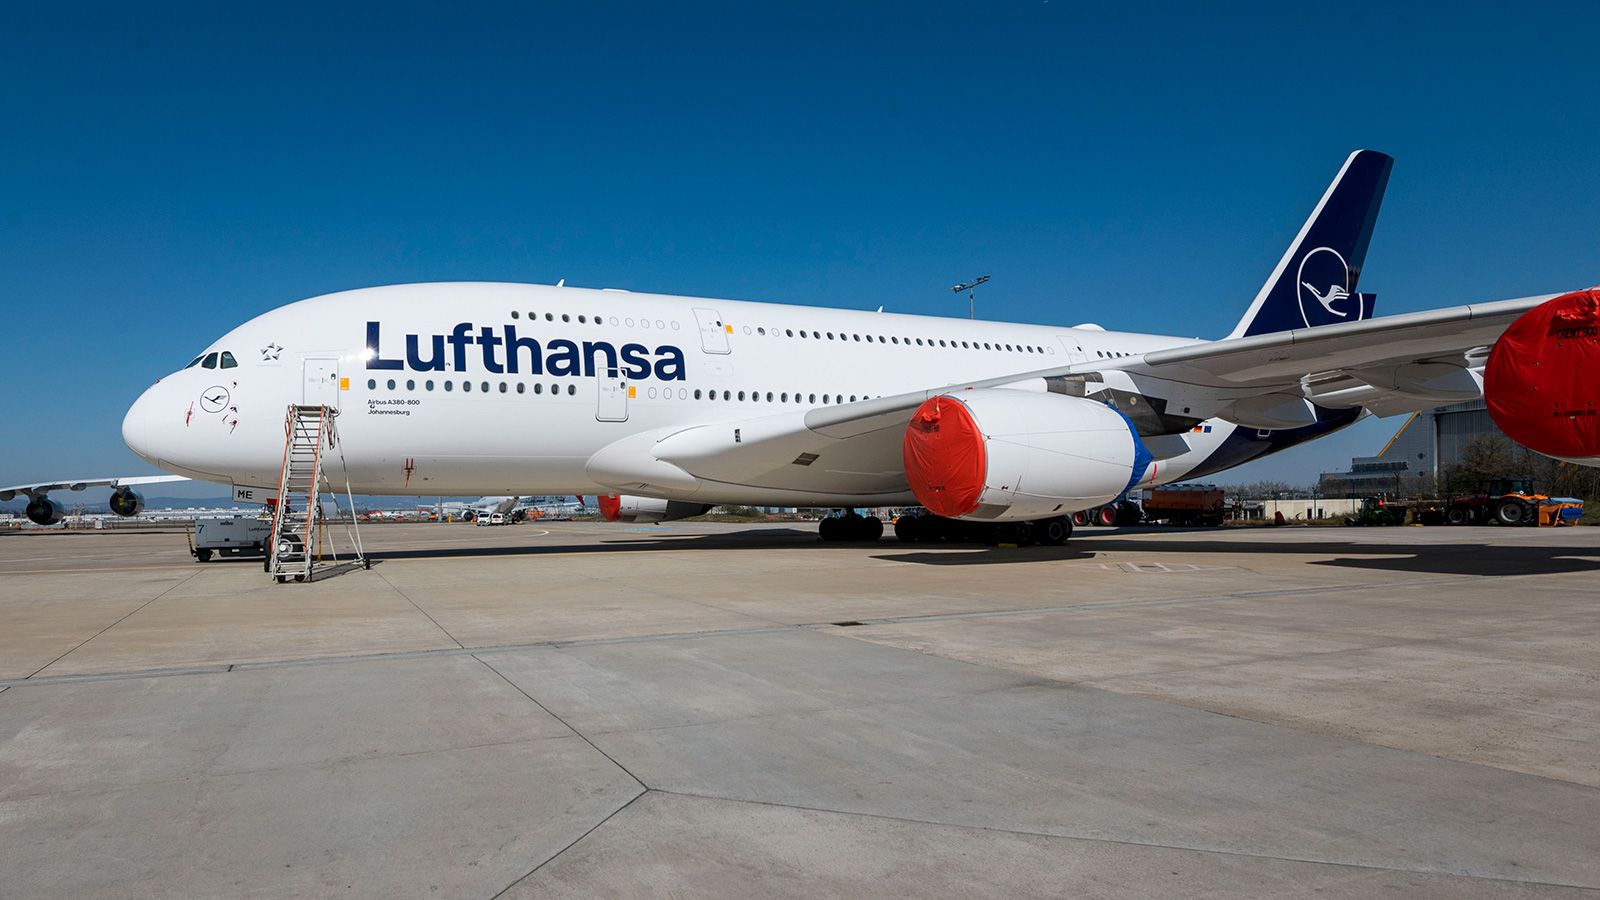 <strong>Lufthansa joins in: </strong>German carrier Lufthansa is the latest to announce the A380's return to its airborne fleet, although its superjumbos won't be flying until 2023.